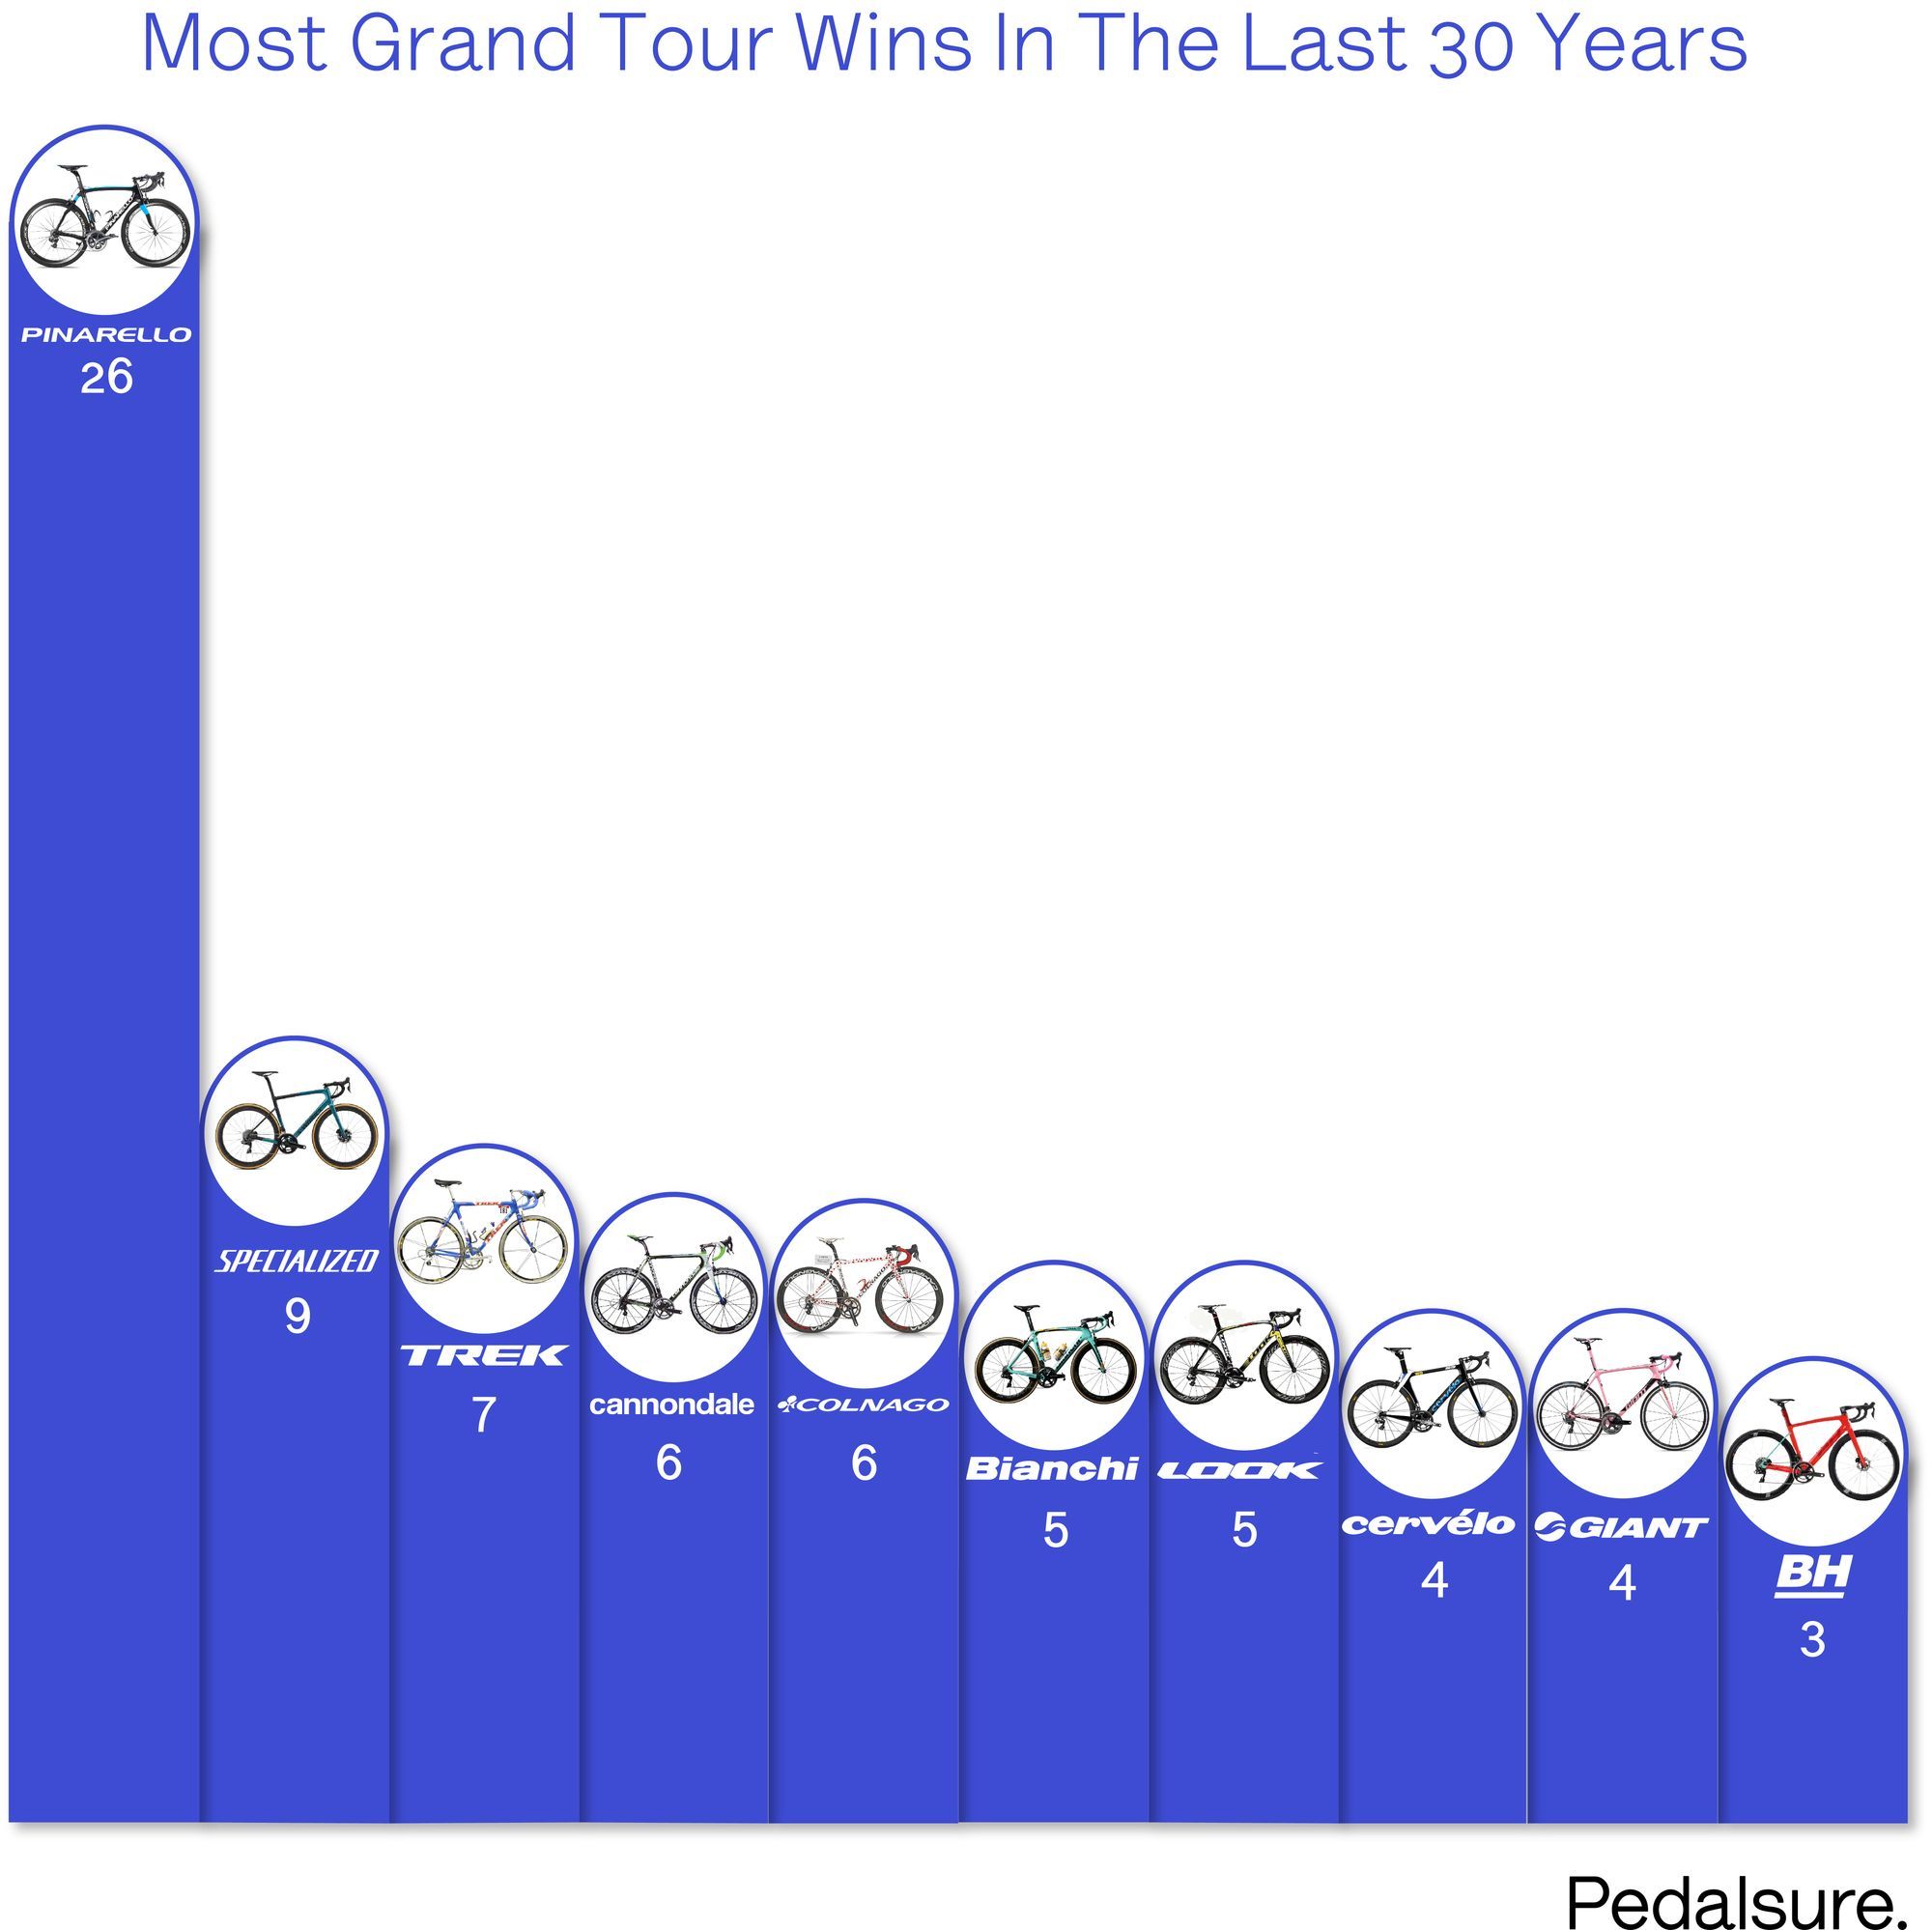 Most grand tour wins by bike brand